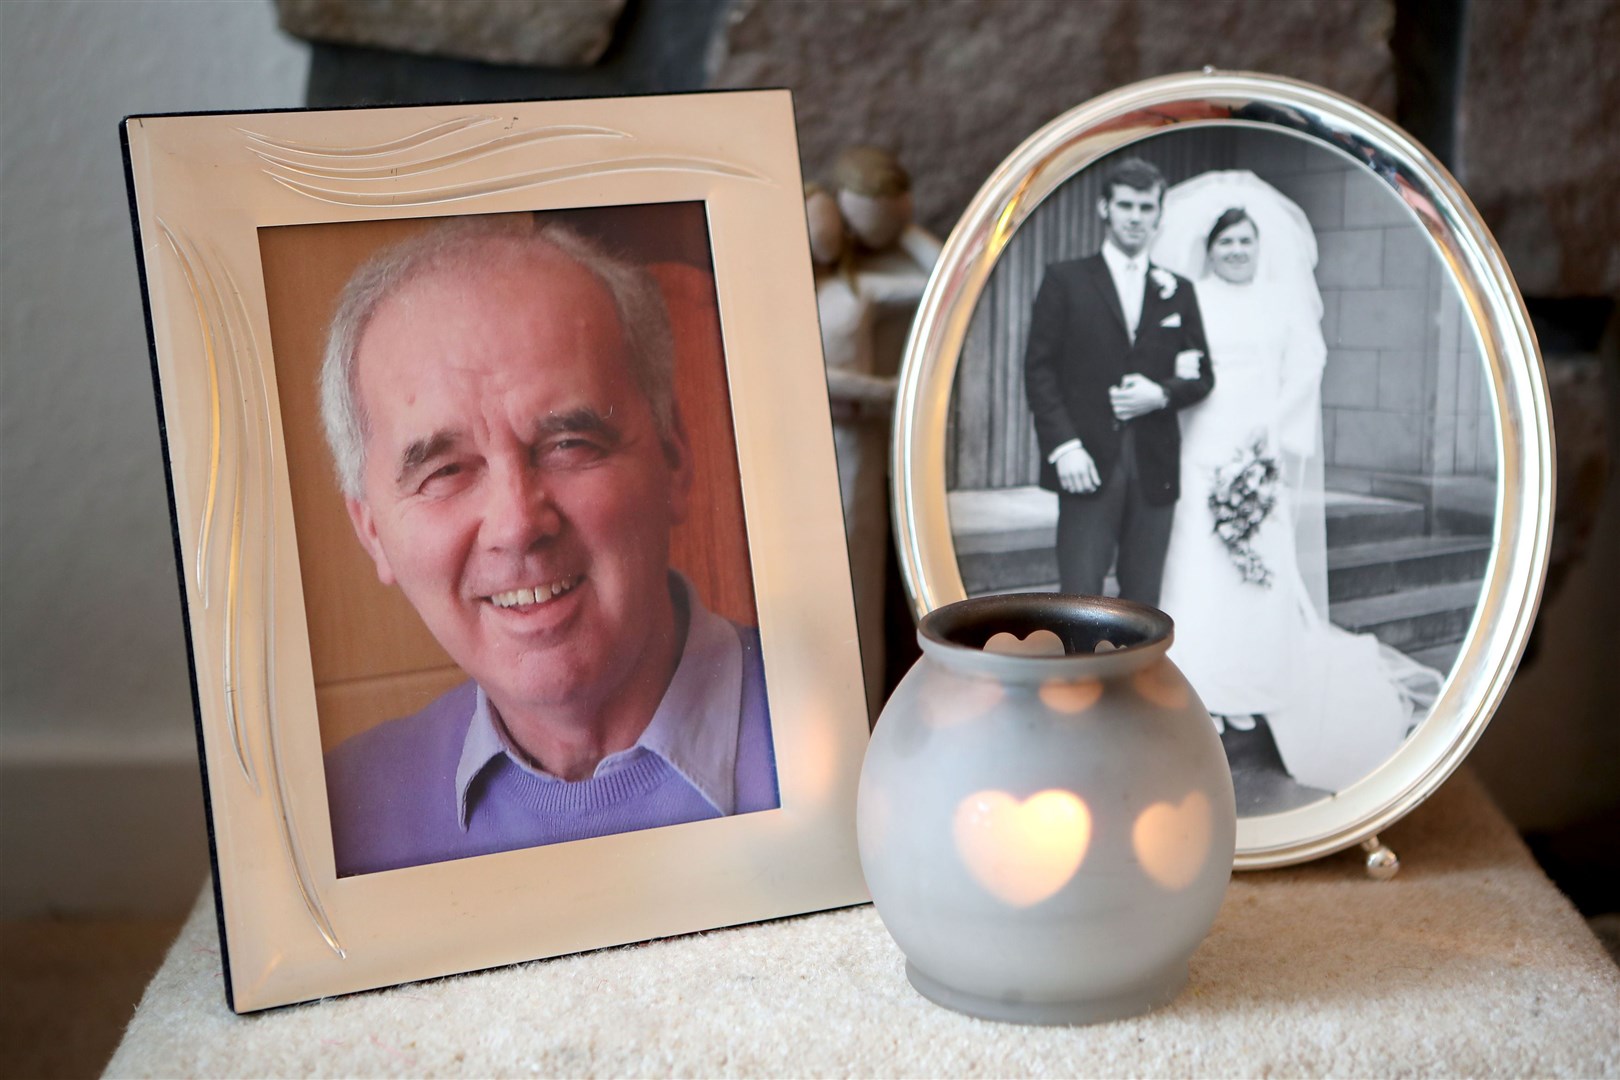 A wedding photograph of Amanda and Frank Kopel on their wedding day and a portrait of the late Frank Kopel, taken in 2012 (Jane Barlow/PA Wire)